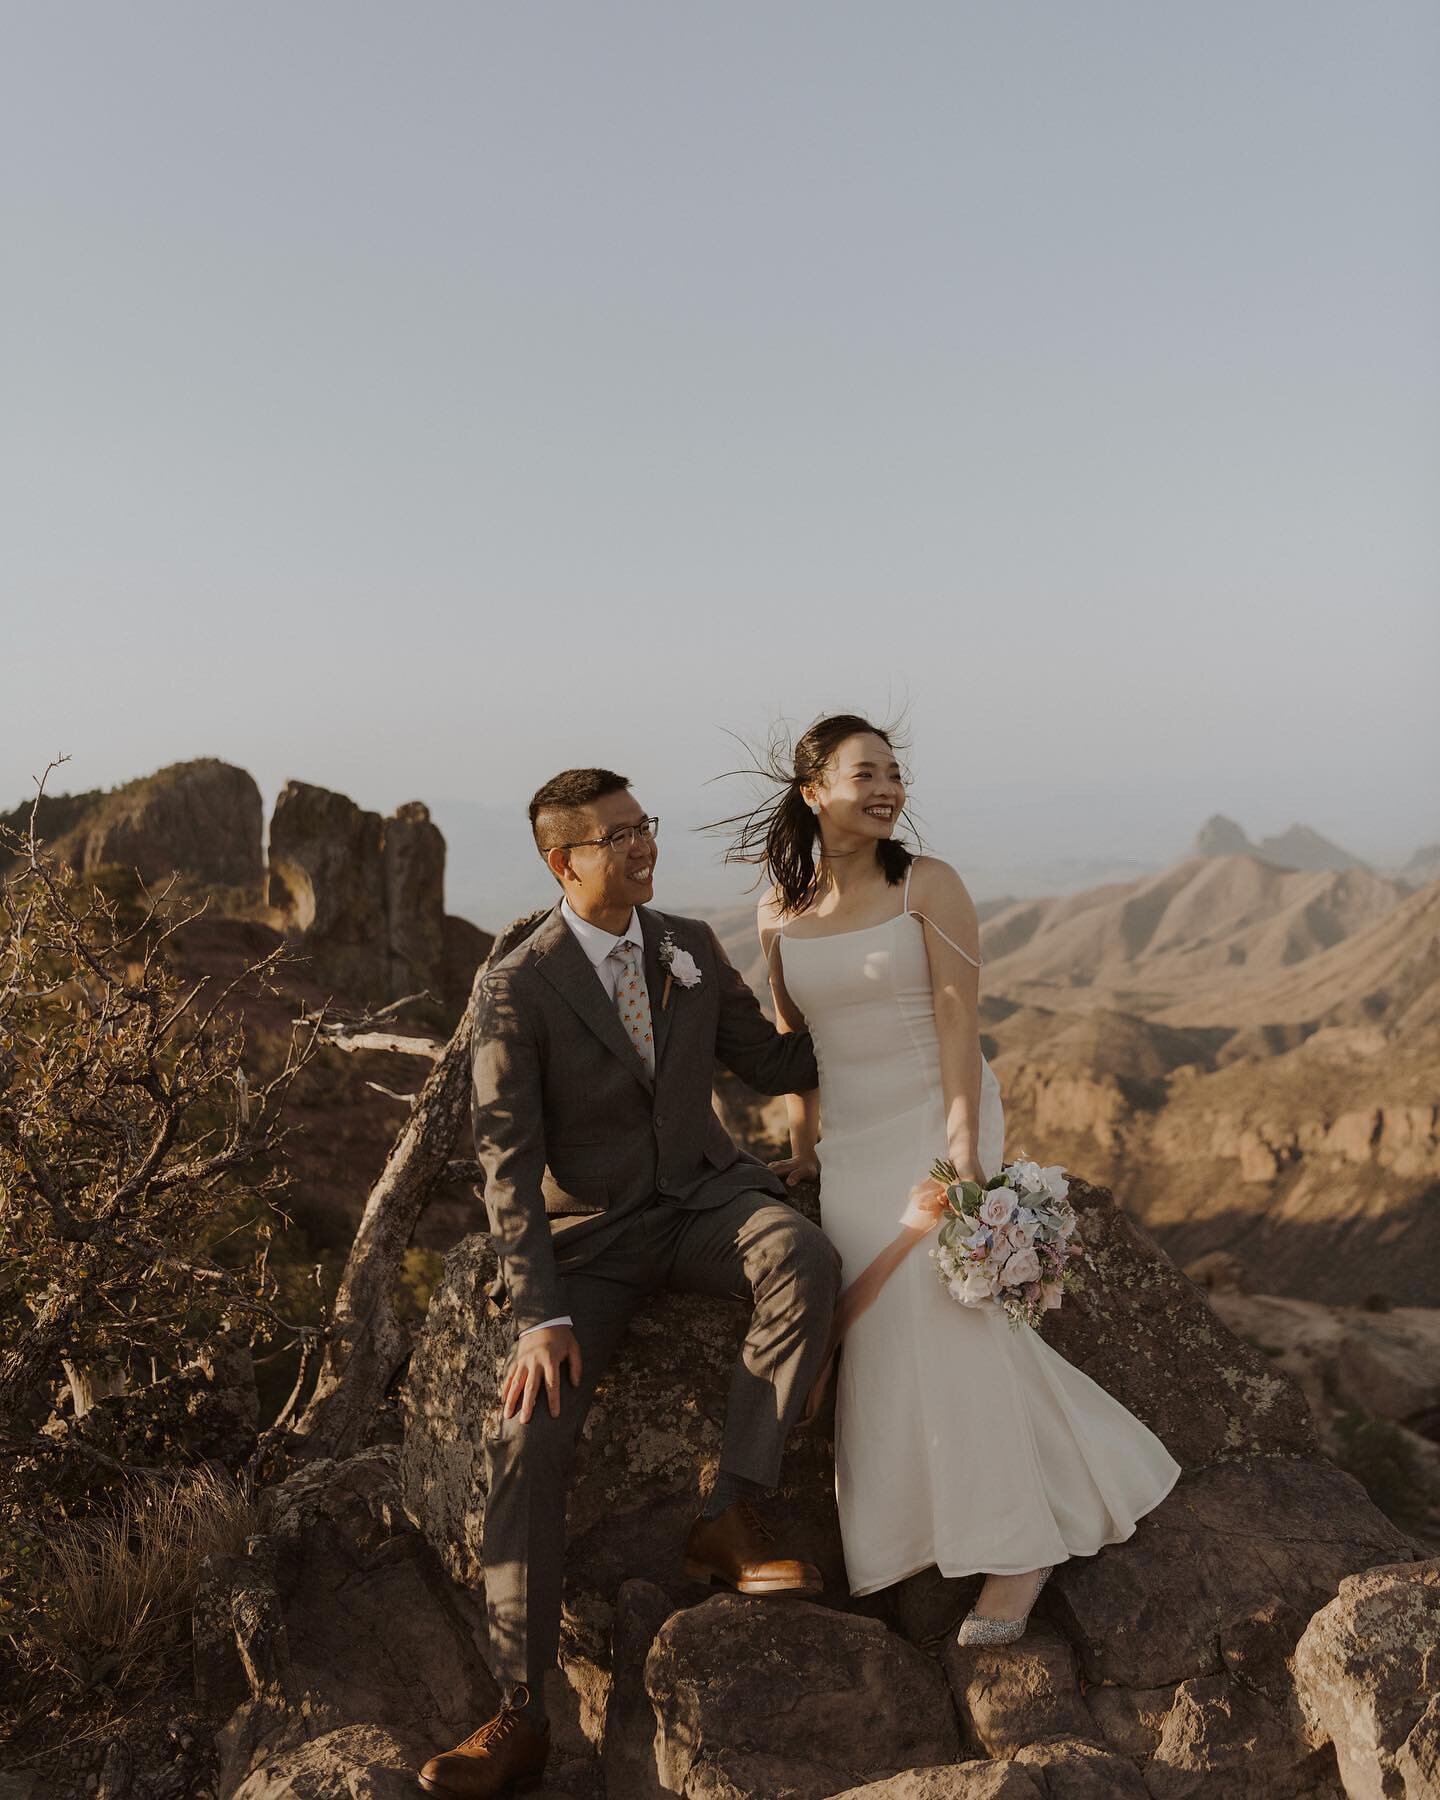 Jinyang + Jiming on top of the world for their sunrise elopement in Big Bend National Park 💛 

Danny and I have been in SLC for the summer, and in less than two months we will be heading down to the place that feels like home deep in my bones&mdash;